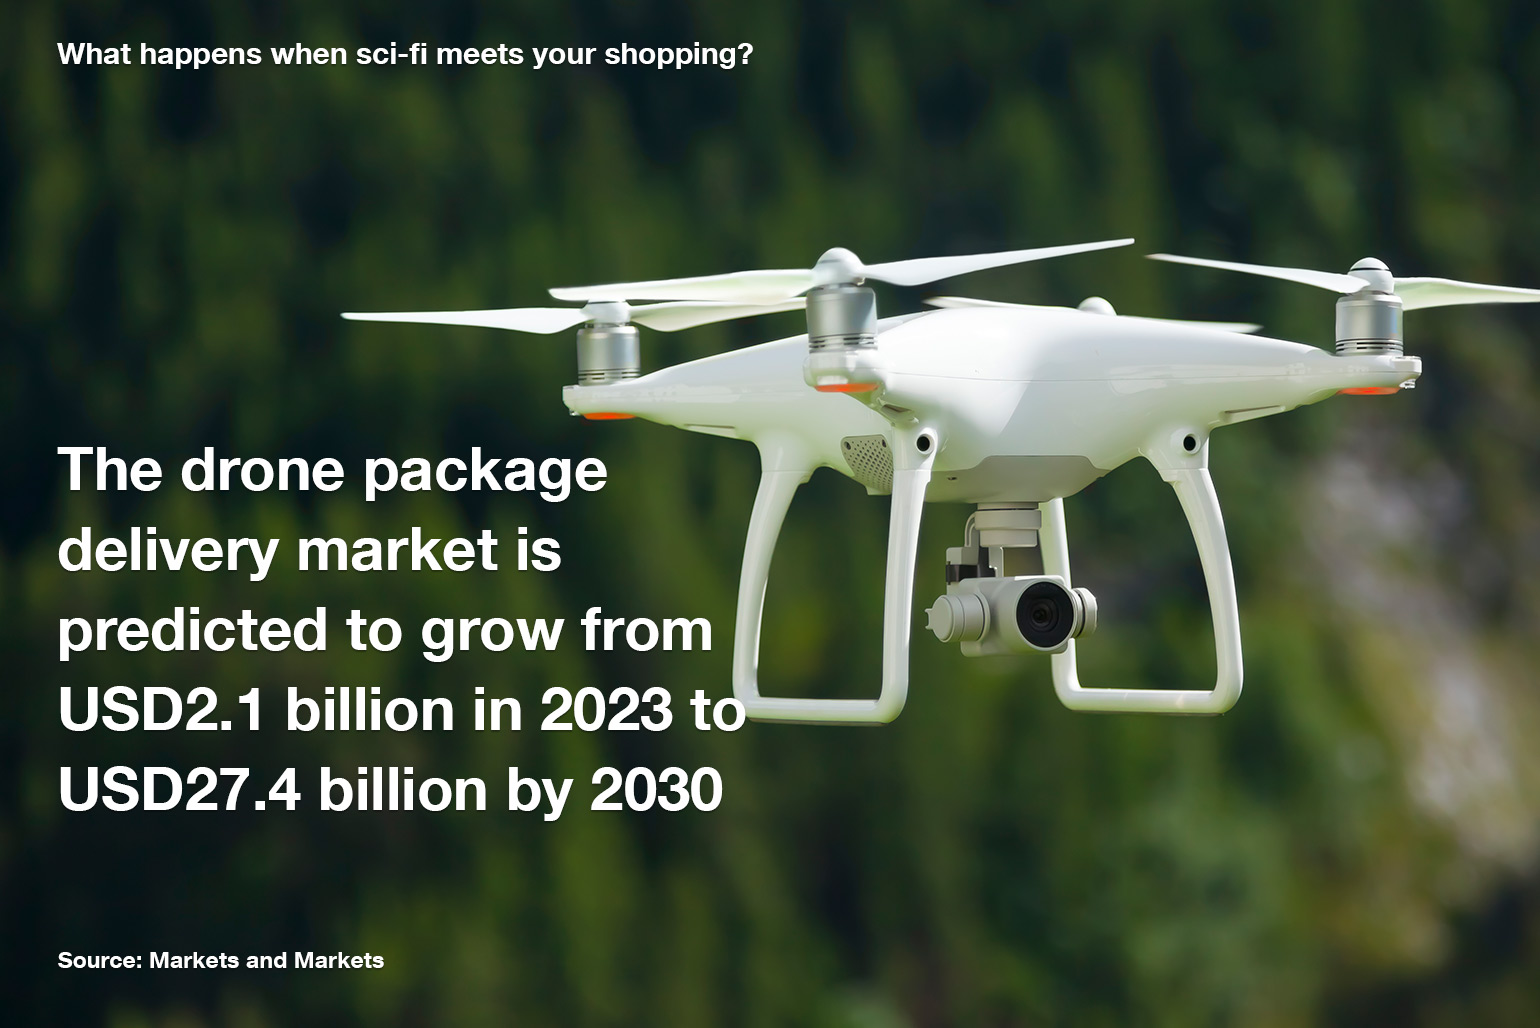 Infographic showing how drone delivery market is predicted to grow